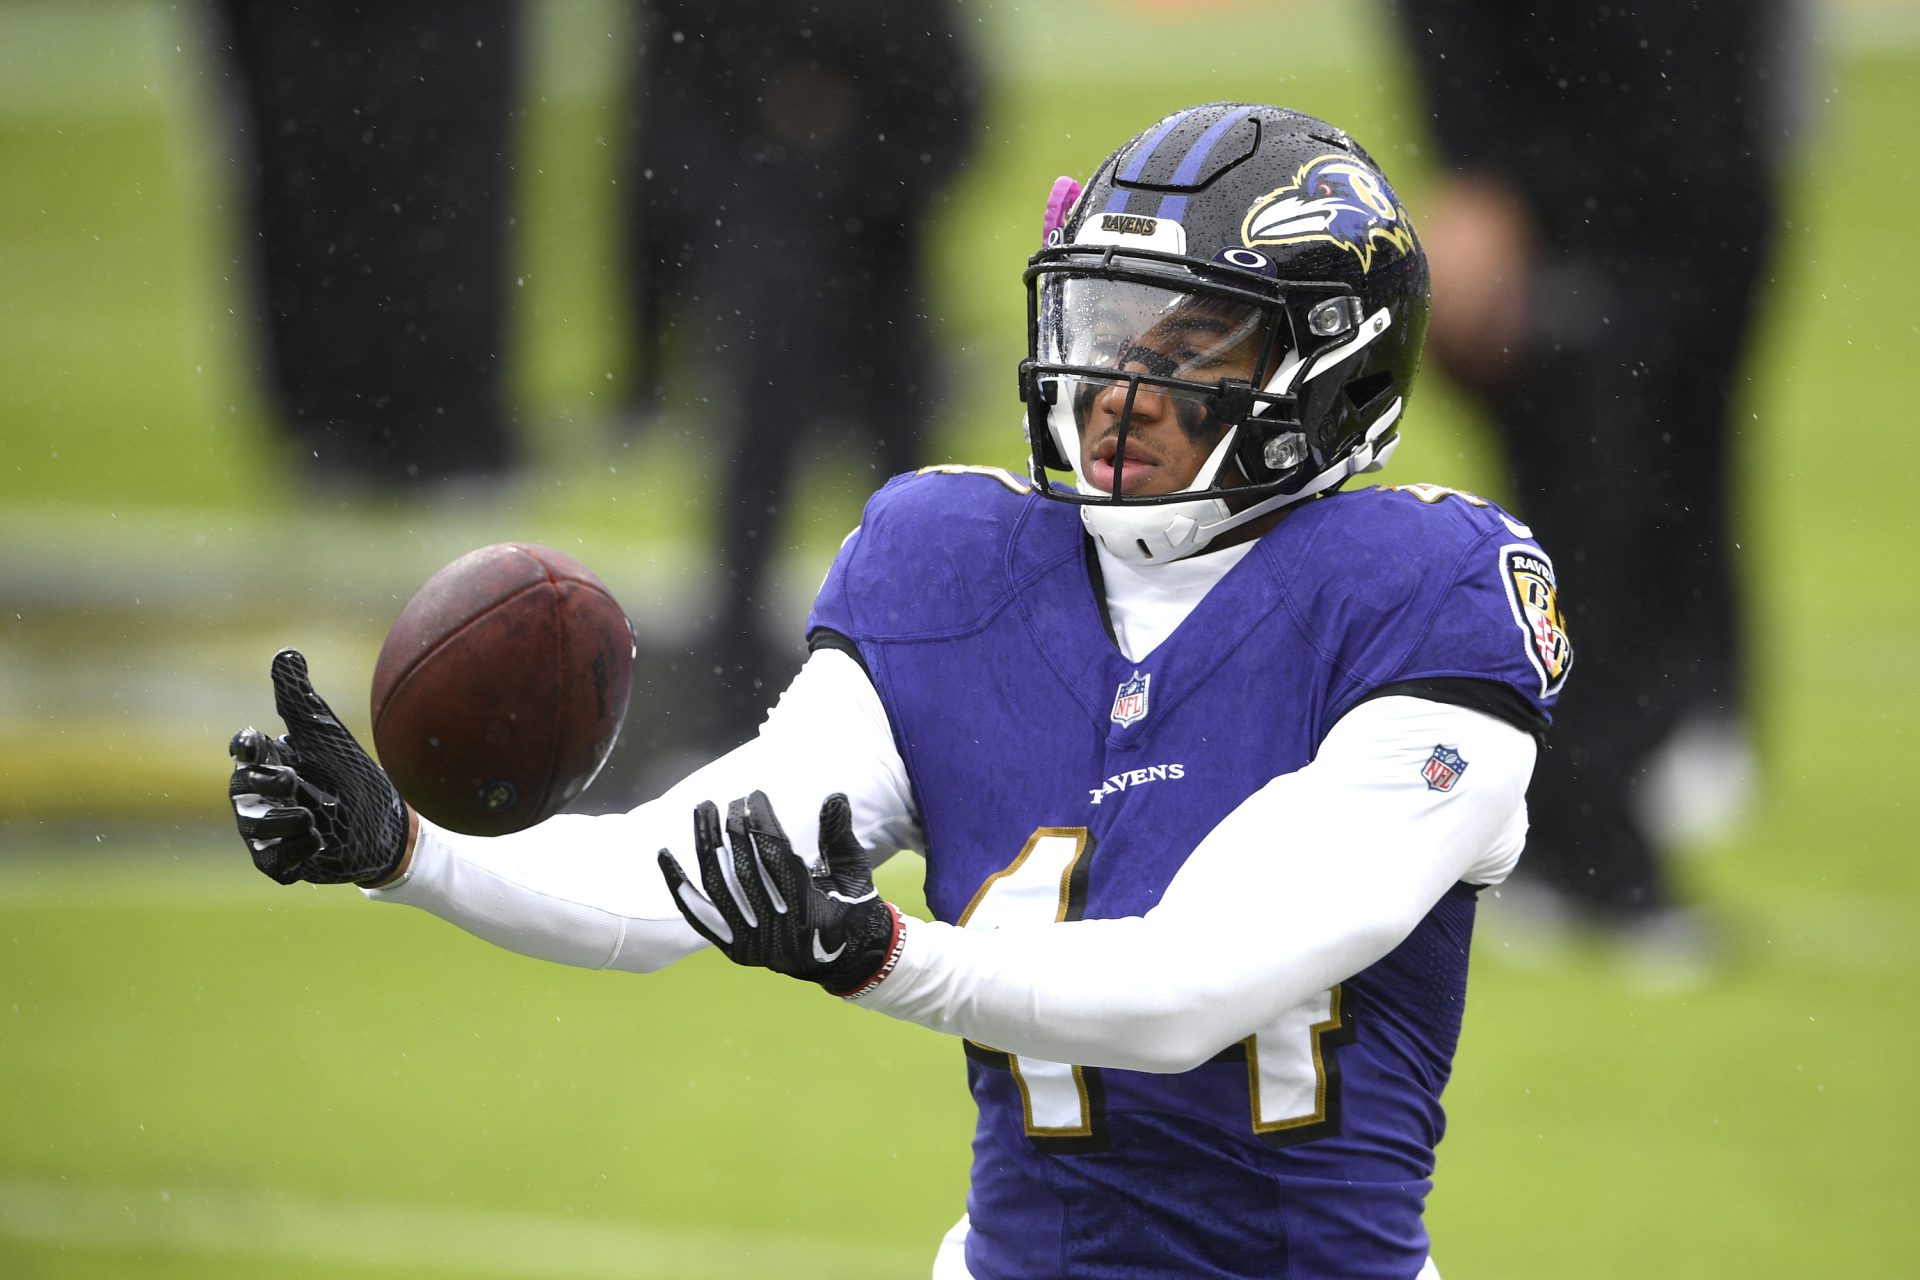 Baltimore Ravens cornerback Marlon Humphrey works out prior to an NFL football game against the Pittsburgh Steelers, Sunday, Nov. 1, 2020, in Baltimore.